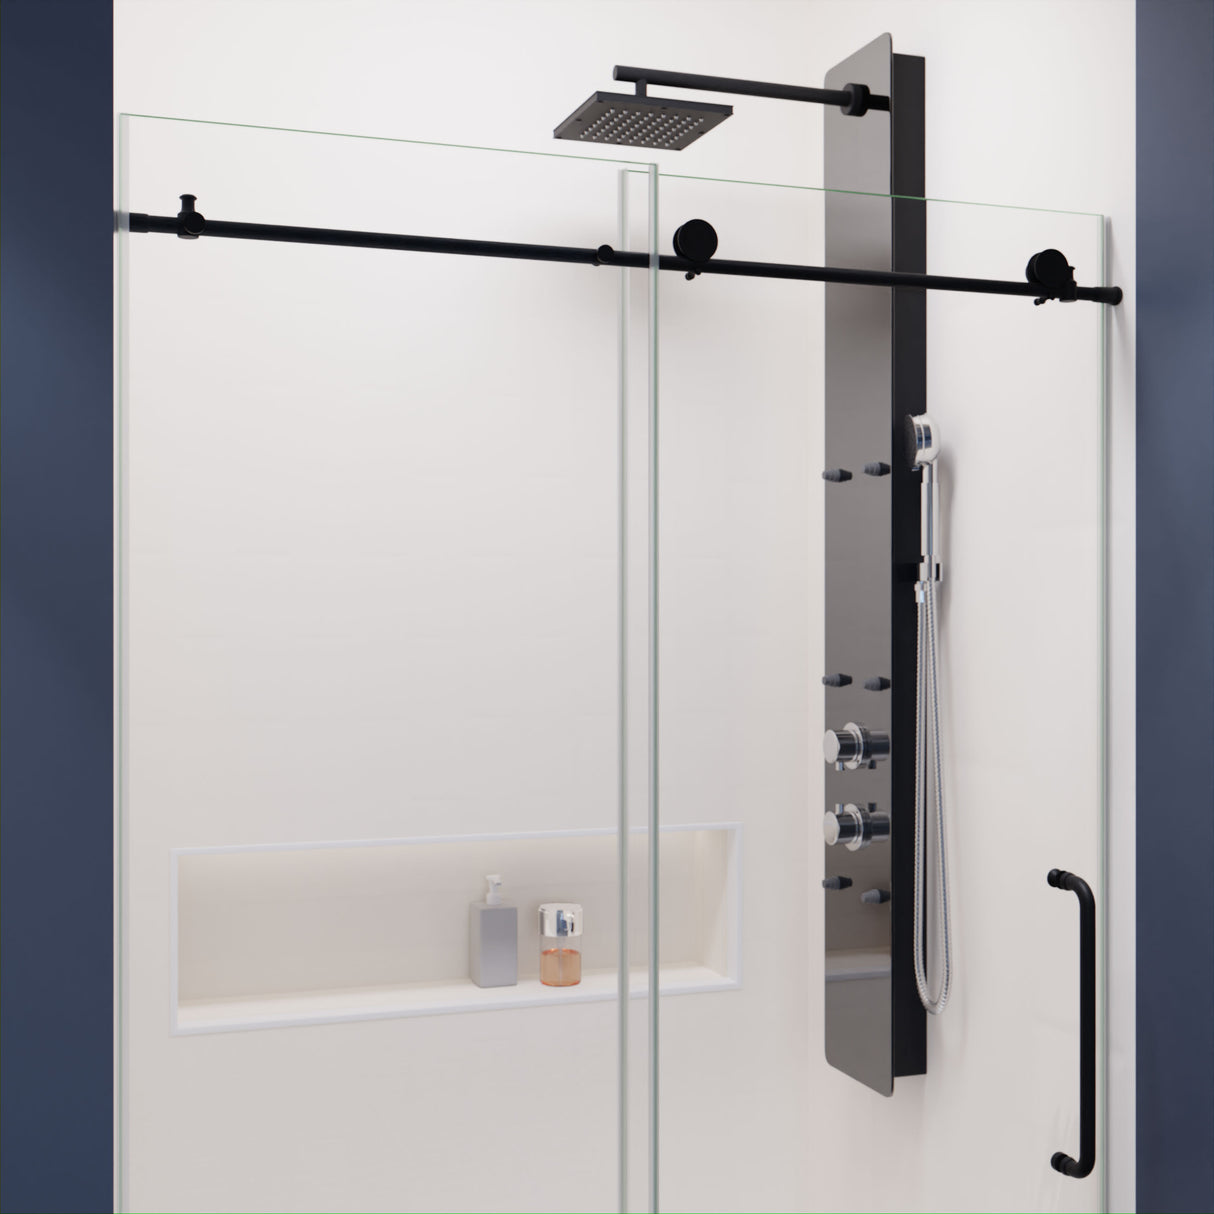 ANZZI SD-AZ13-01MB Madam Series 48 in. by 76 in. Frameless Sliding Shower Door in Matte Black with Handle